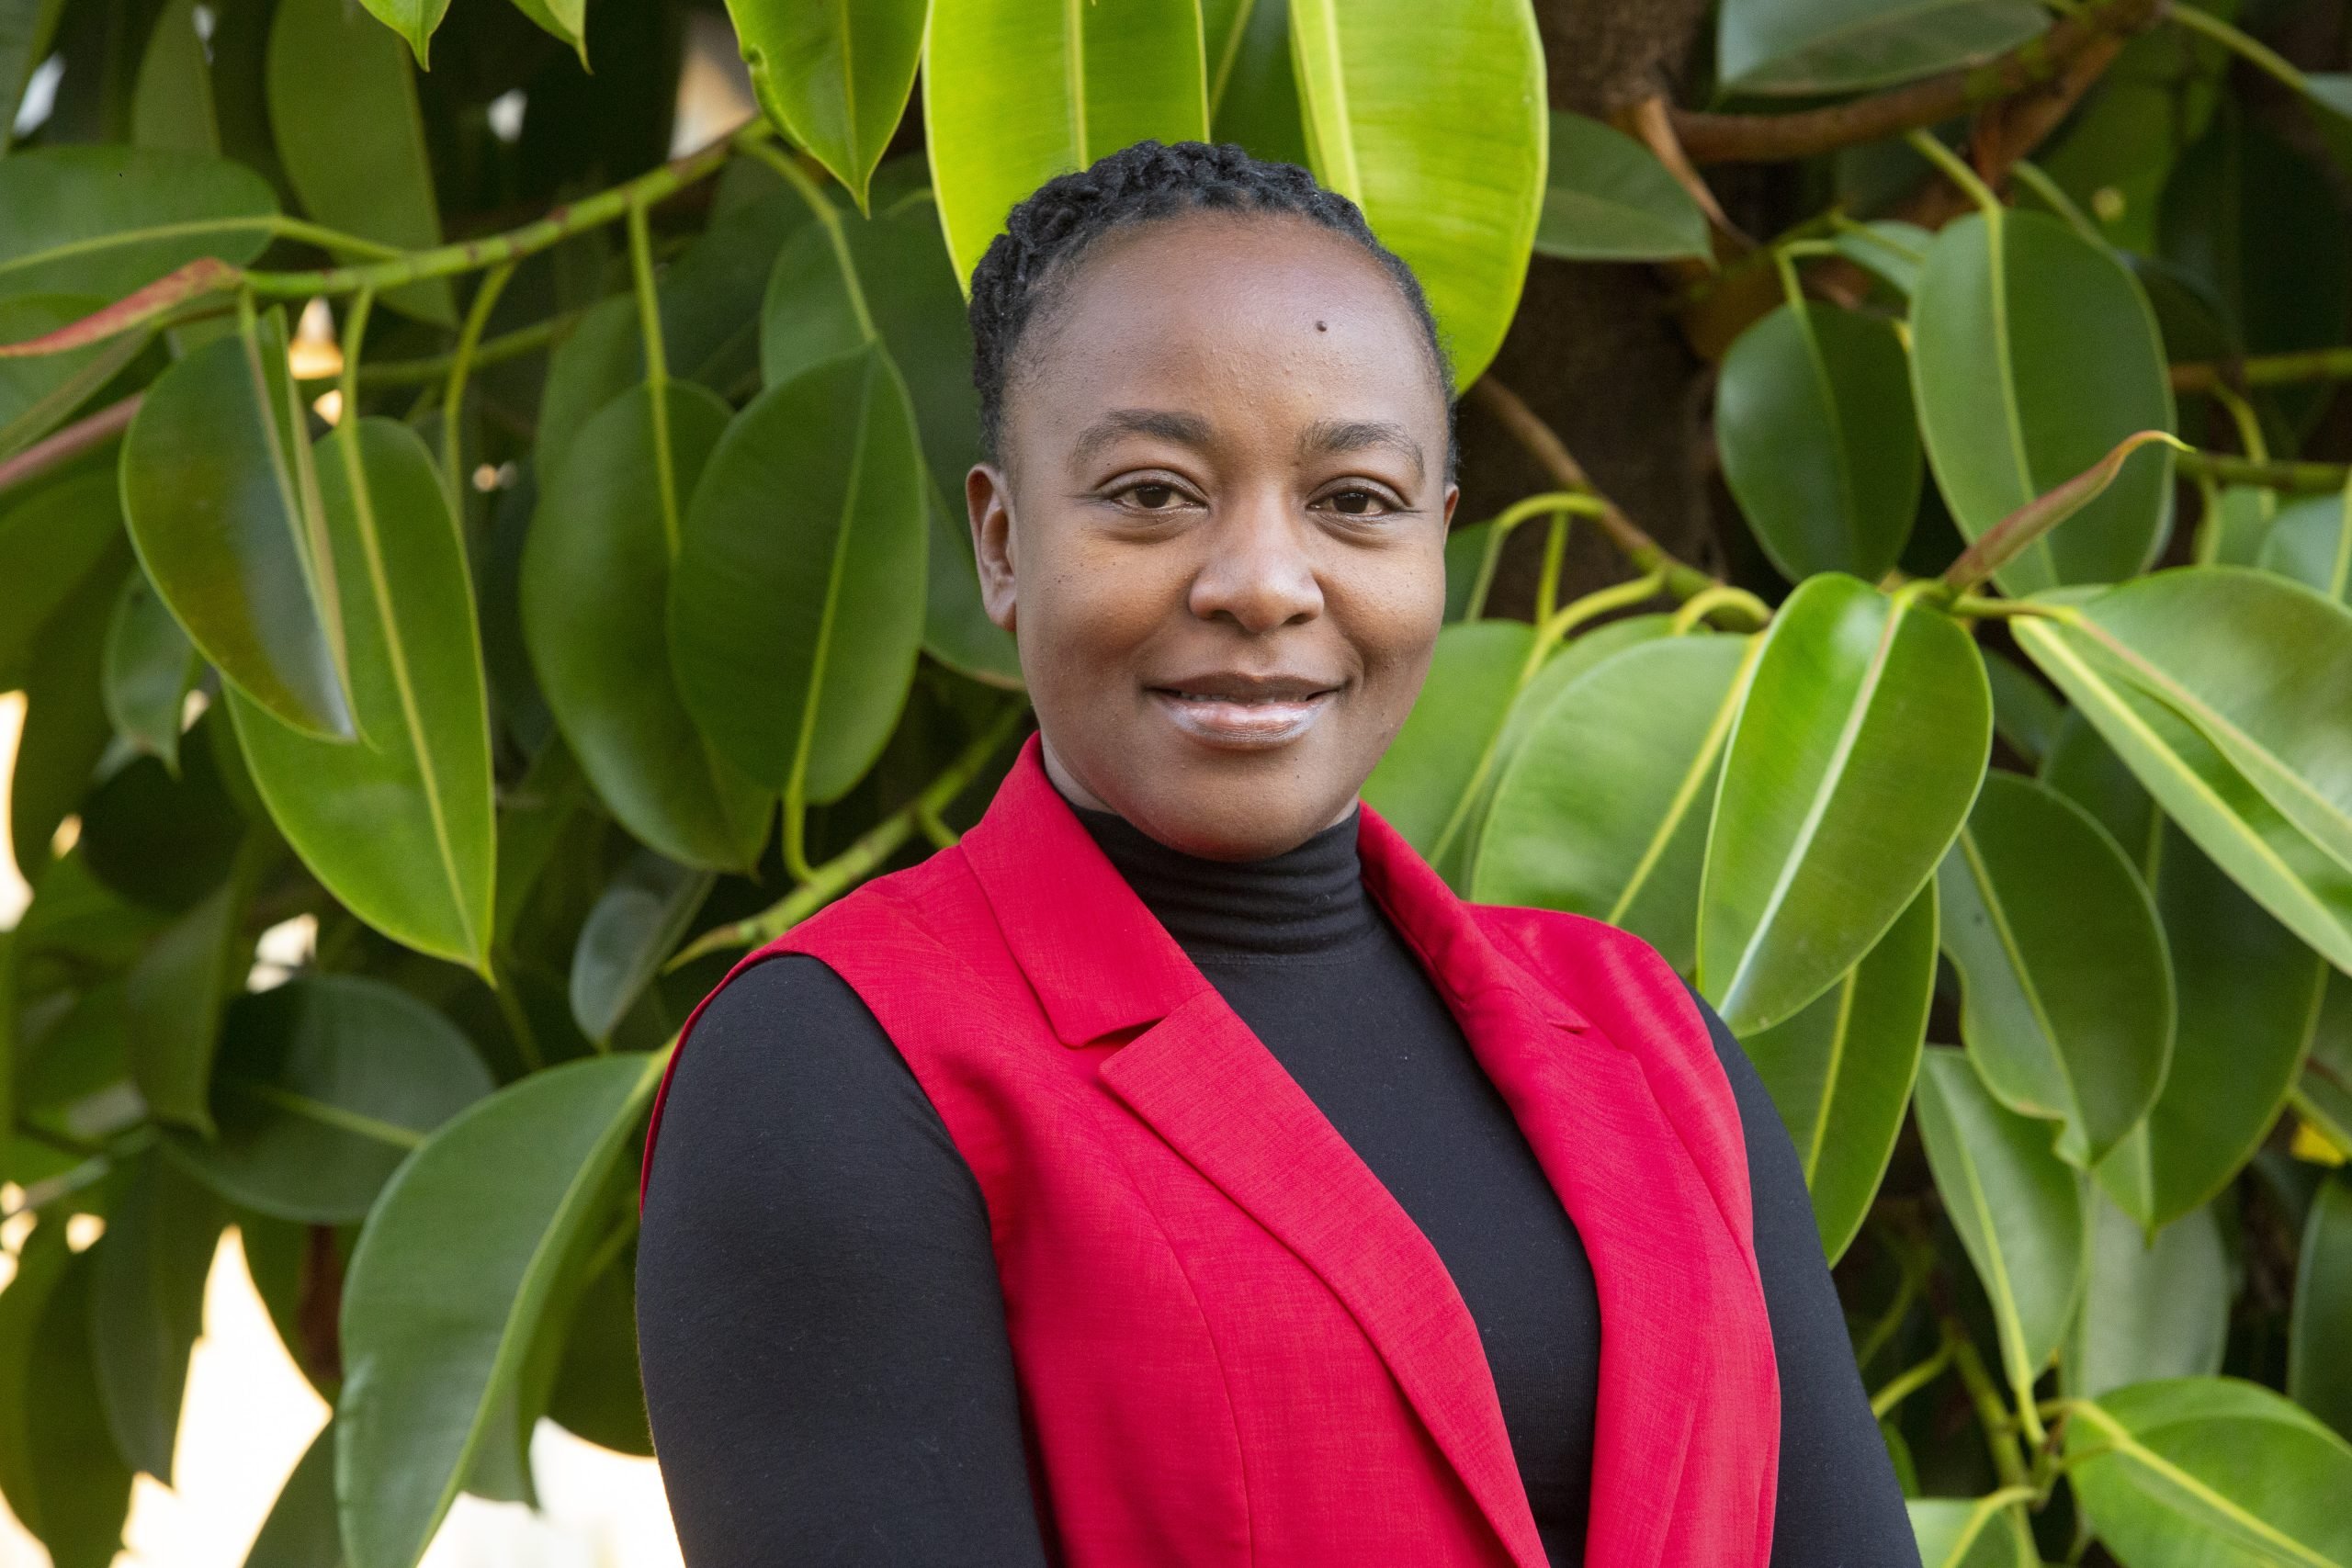 Pauline Wambeti stands in front of a green plant background